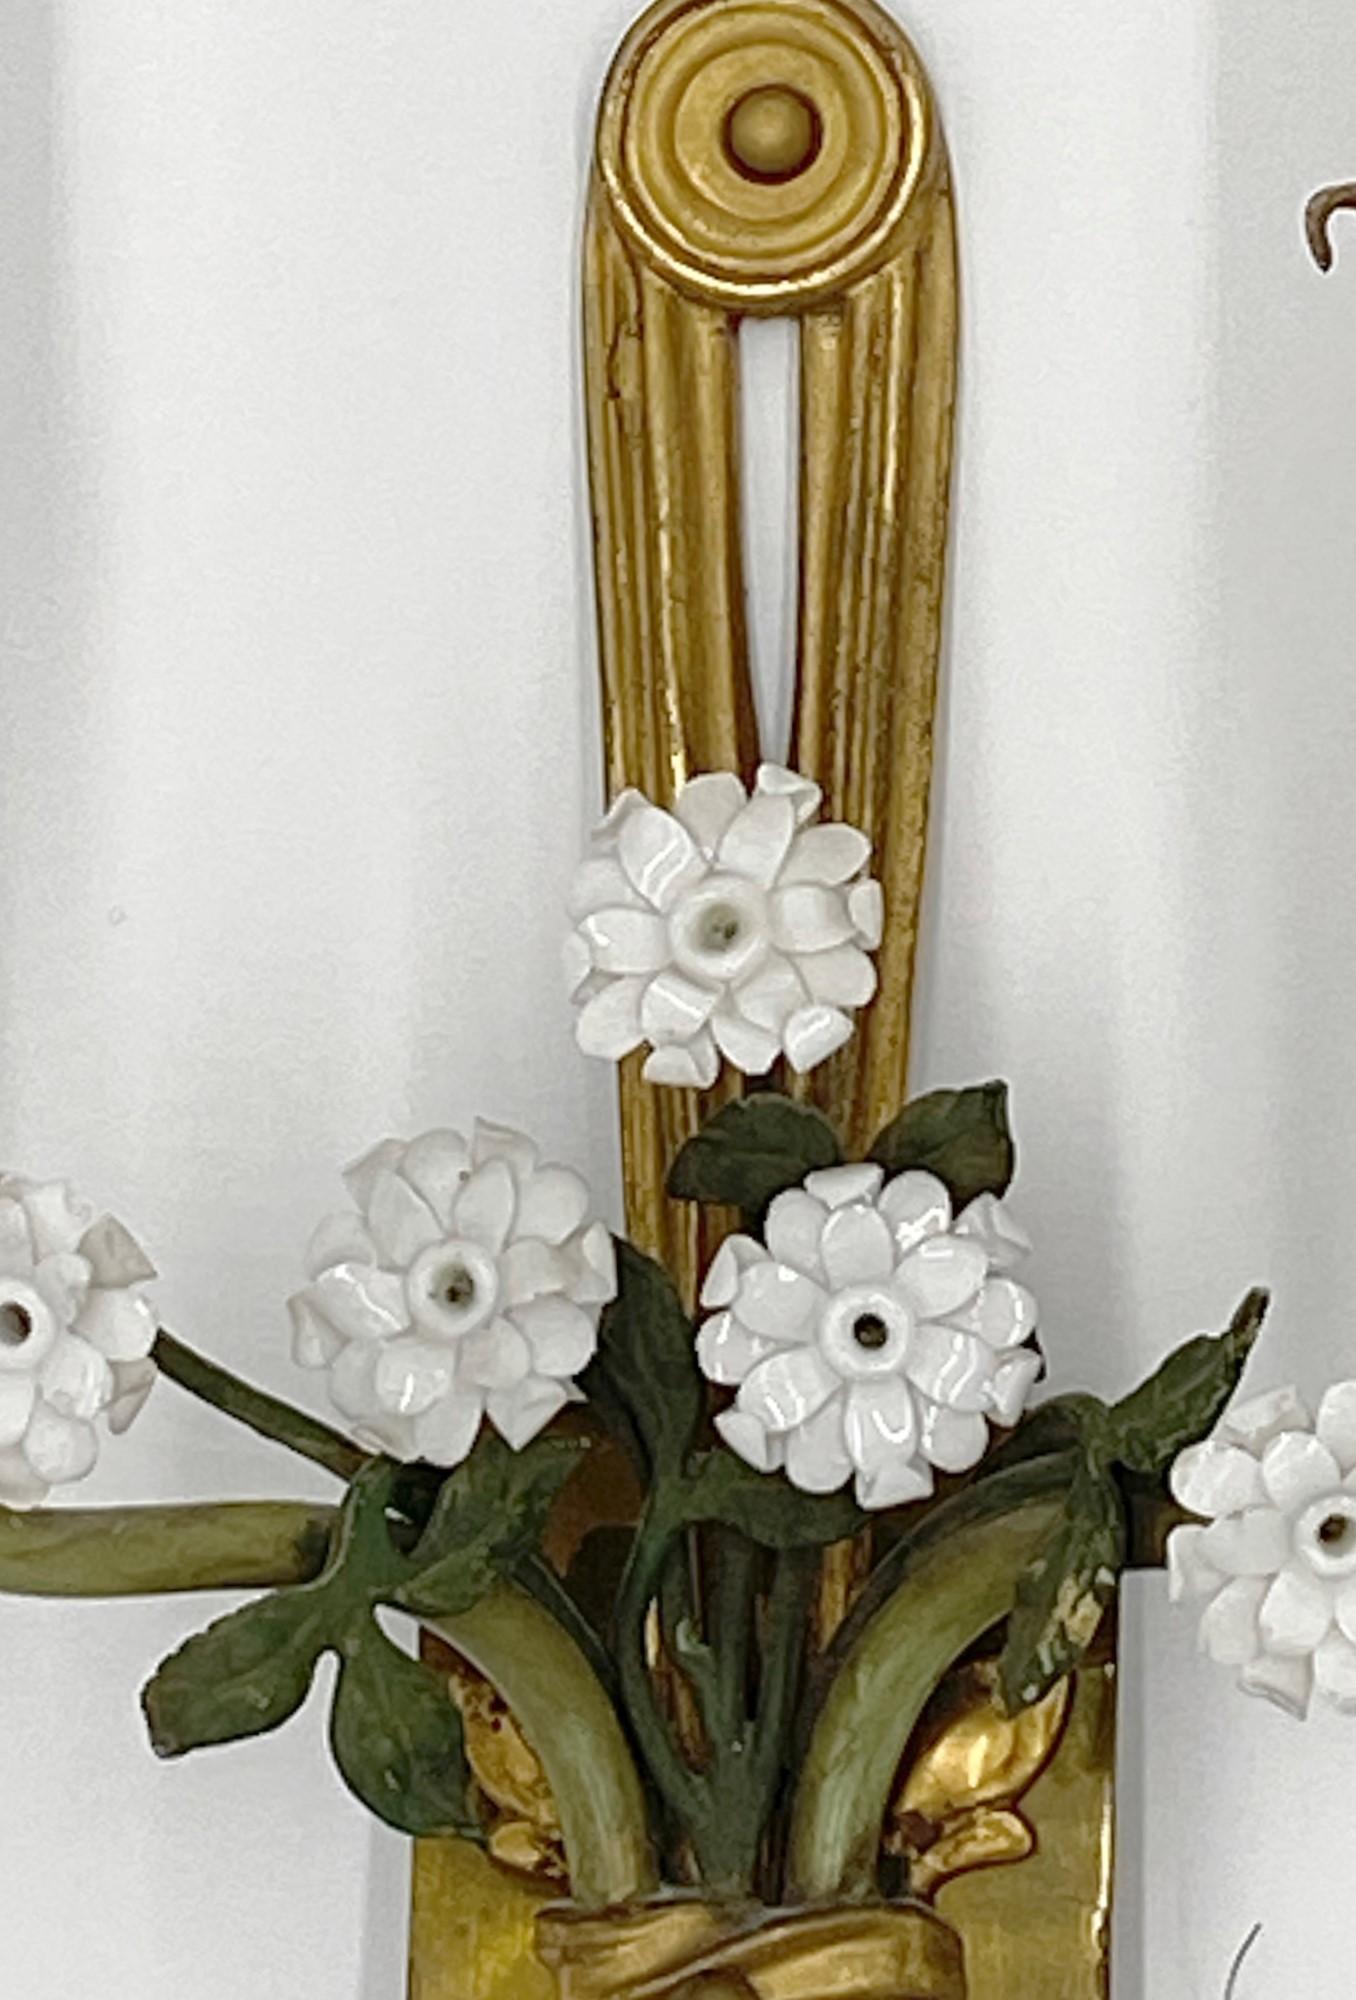 Mid-20th century Italian bronze two arm sconces featuring white porcelain floral flowers details in a green colored vase motif. Priced as a pair. This can be seen at our 333 West 52nd St location in the Theater District West of Manhattan.